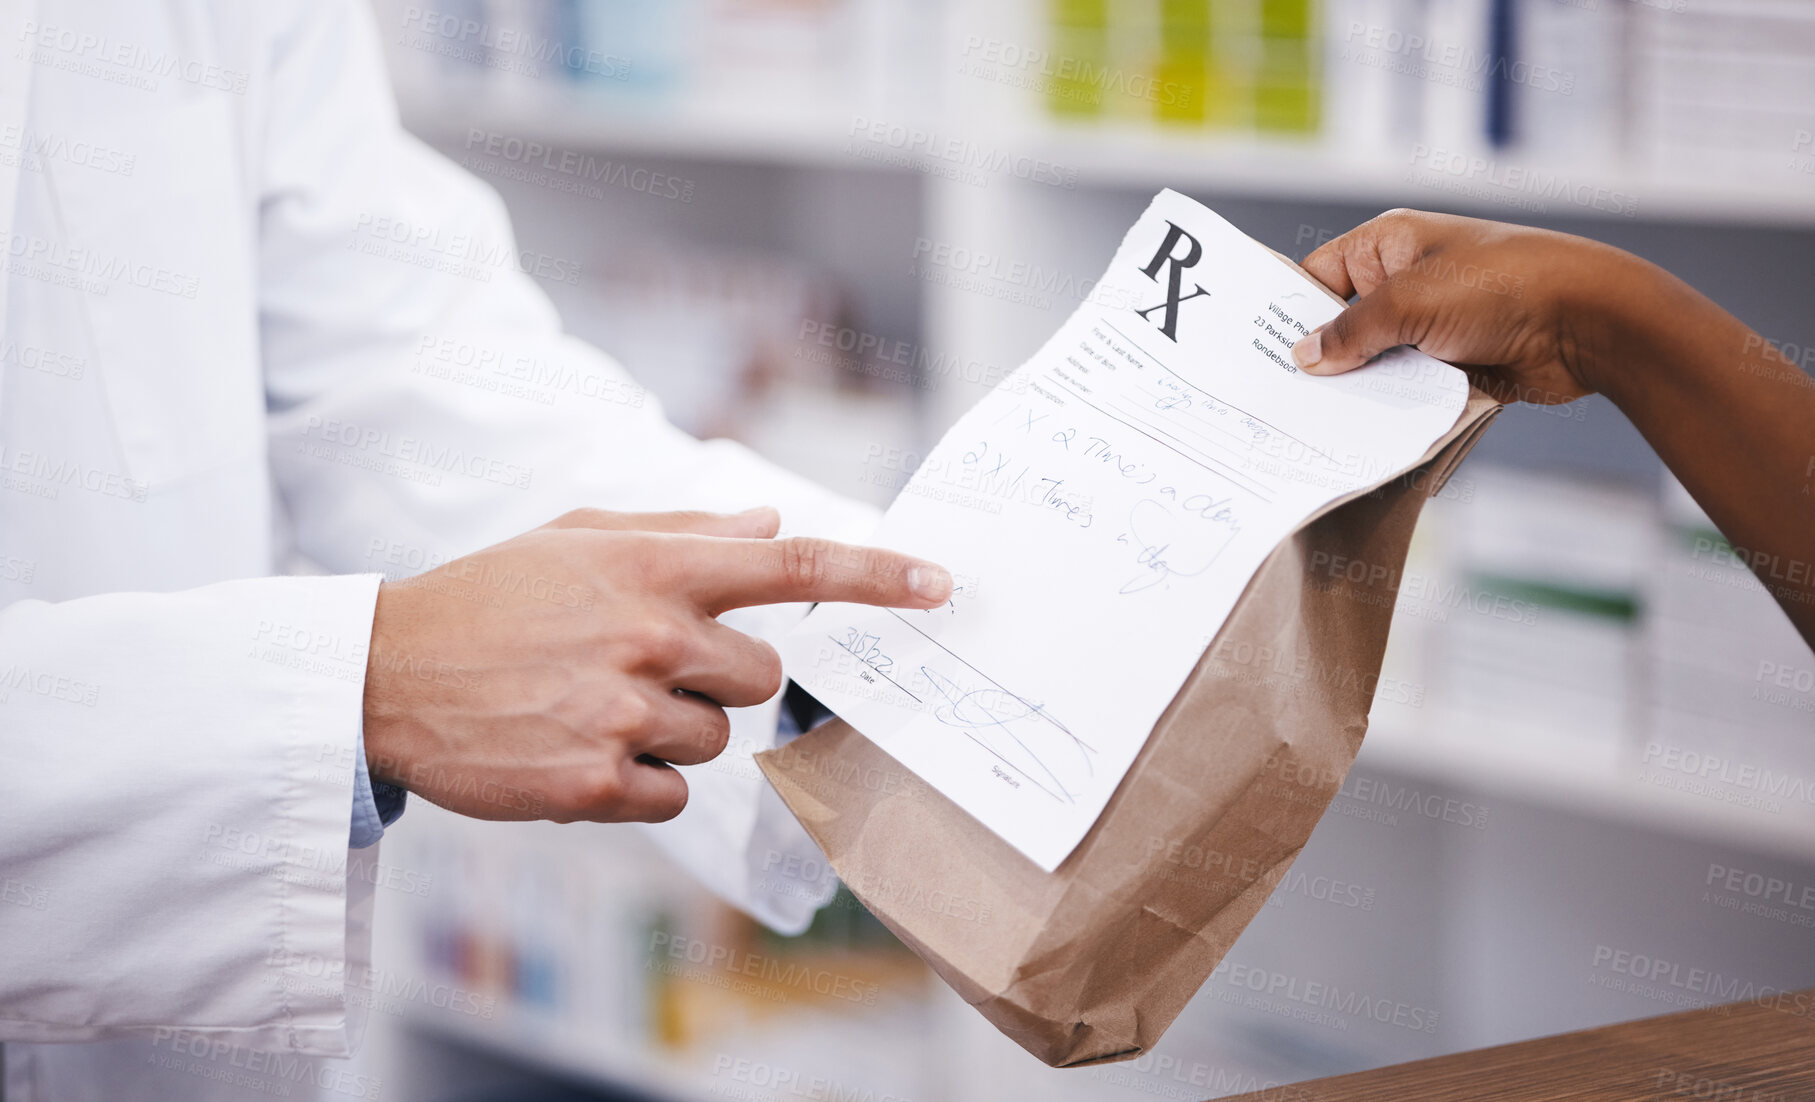 Buy stock photo Bag, medicine or pharmacist hands a person healthcare prescription, pointing or pharmacy receipt. Zoom, shopping or doctor giving customer products, instruction or package for medical retail services